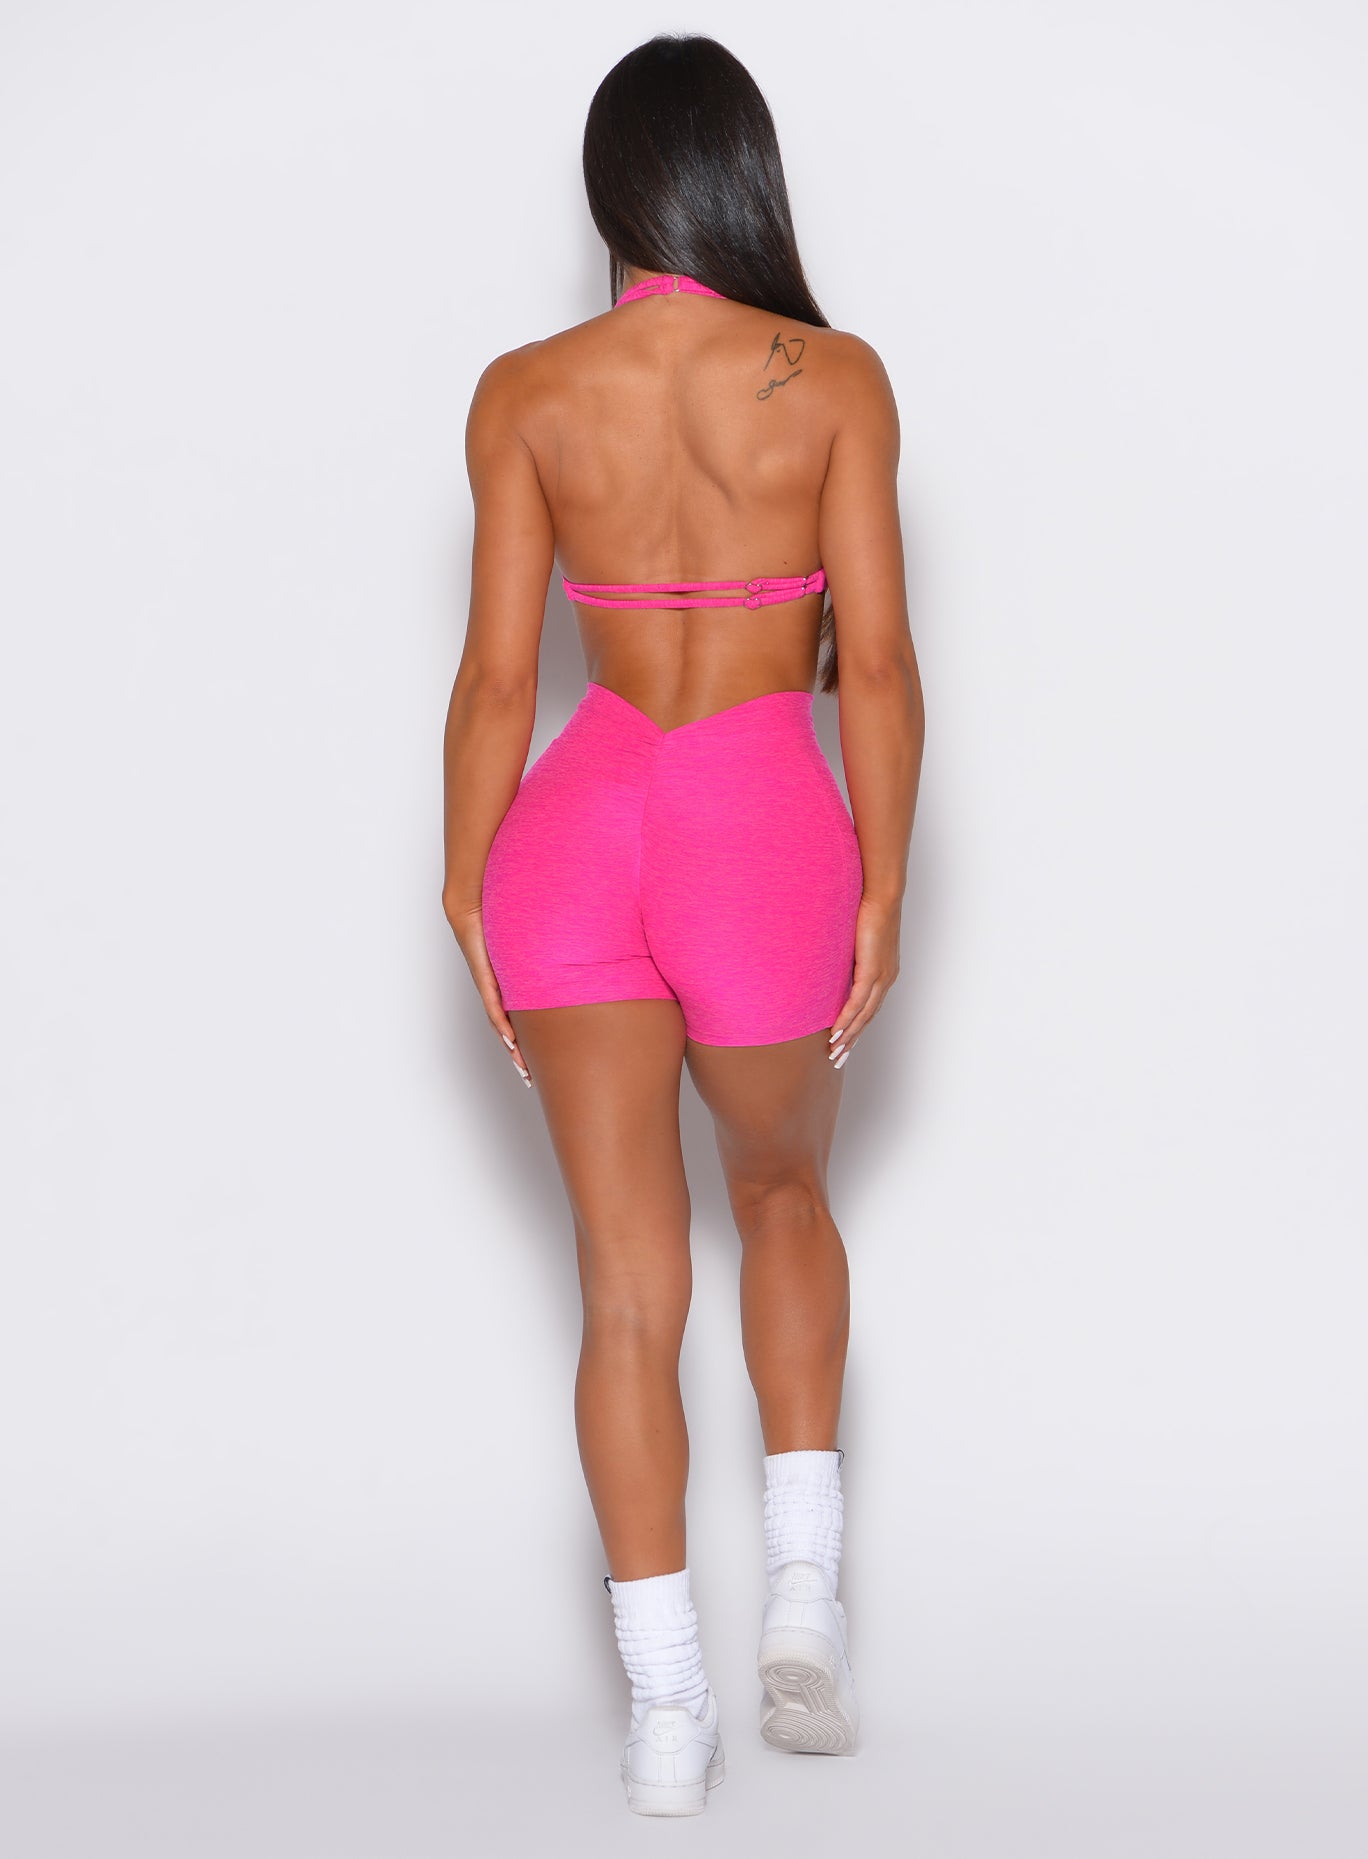 back profile view of a model wearing our V back shorts in Neon Pink Berry color along with the matching bra